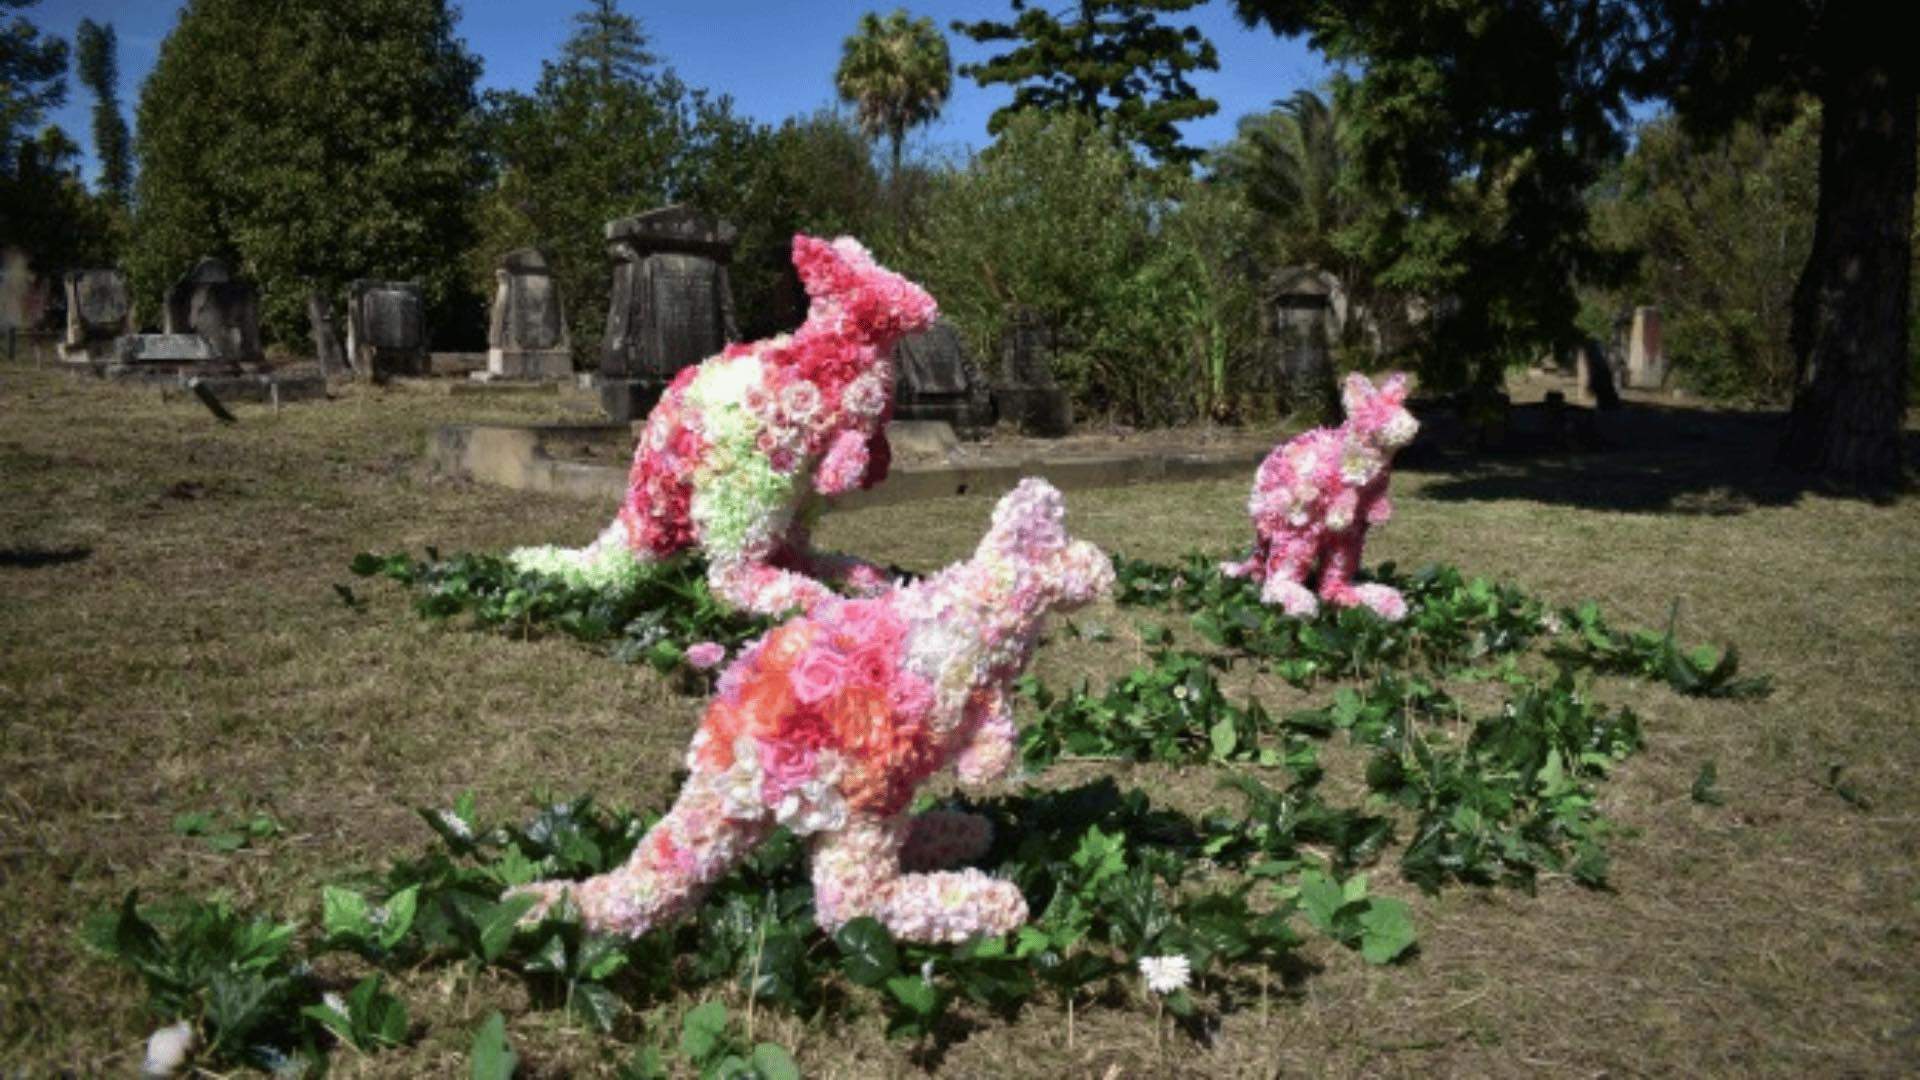 A photo of three kangaroo sculptures titled 'Your one wild and precious life' (2022) by Karen Golland at Rookwood Cemetery.